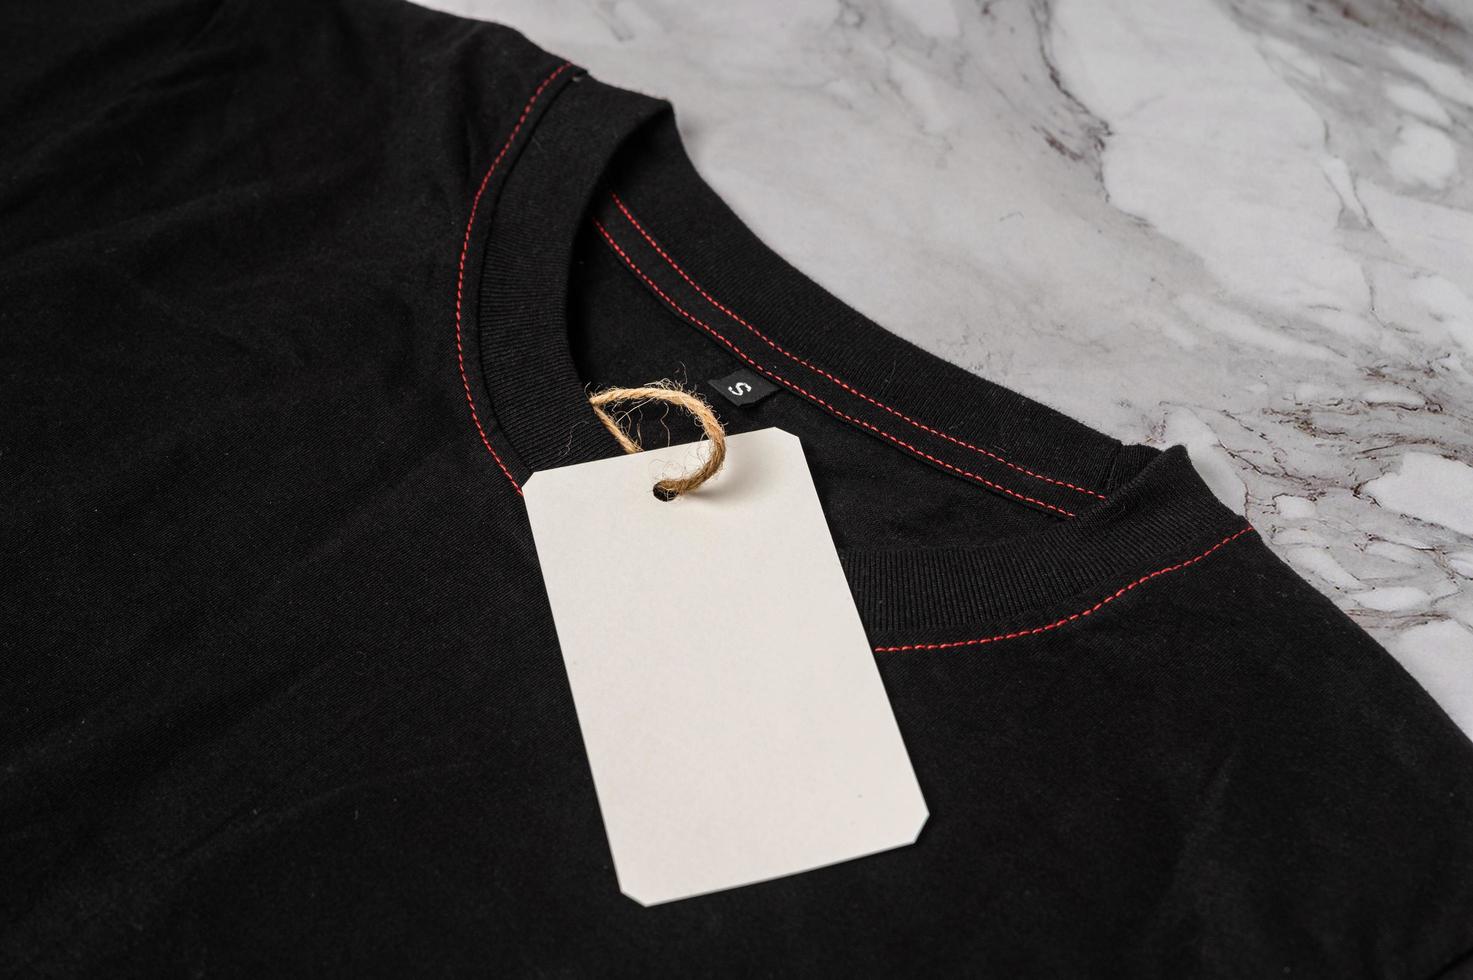 Black t-shirt with clear tag photo